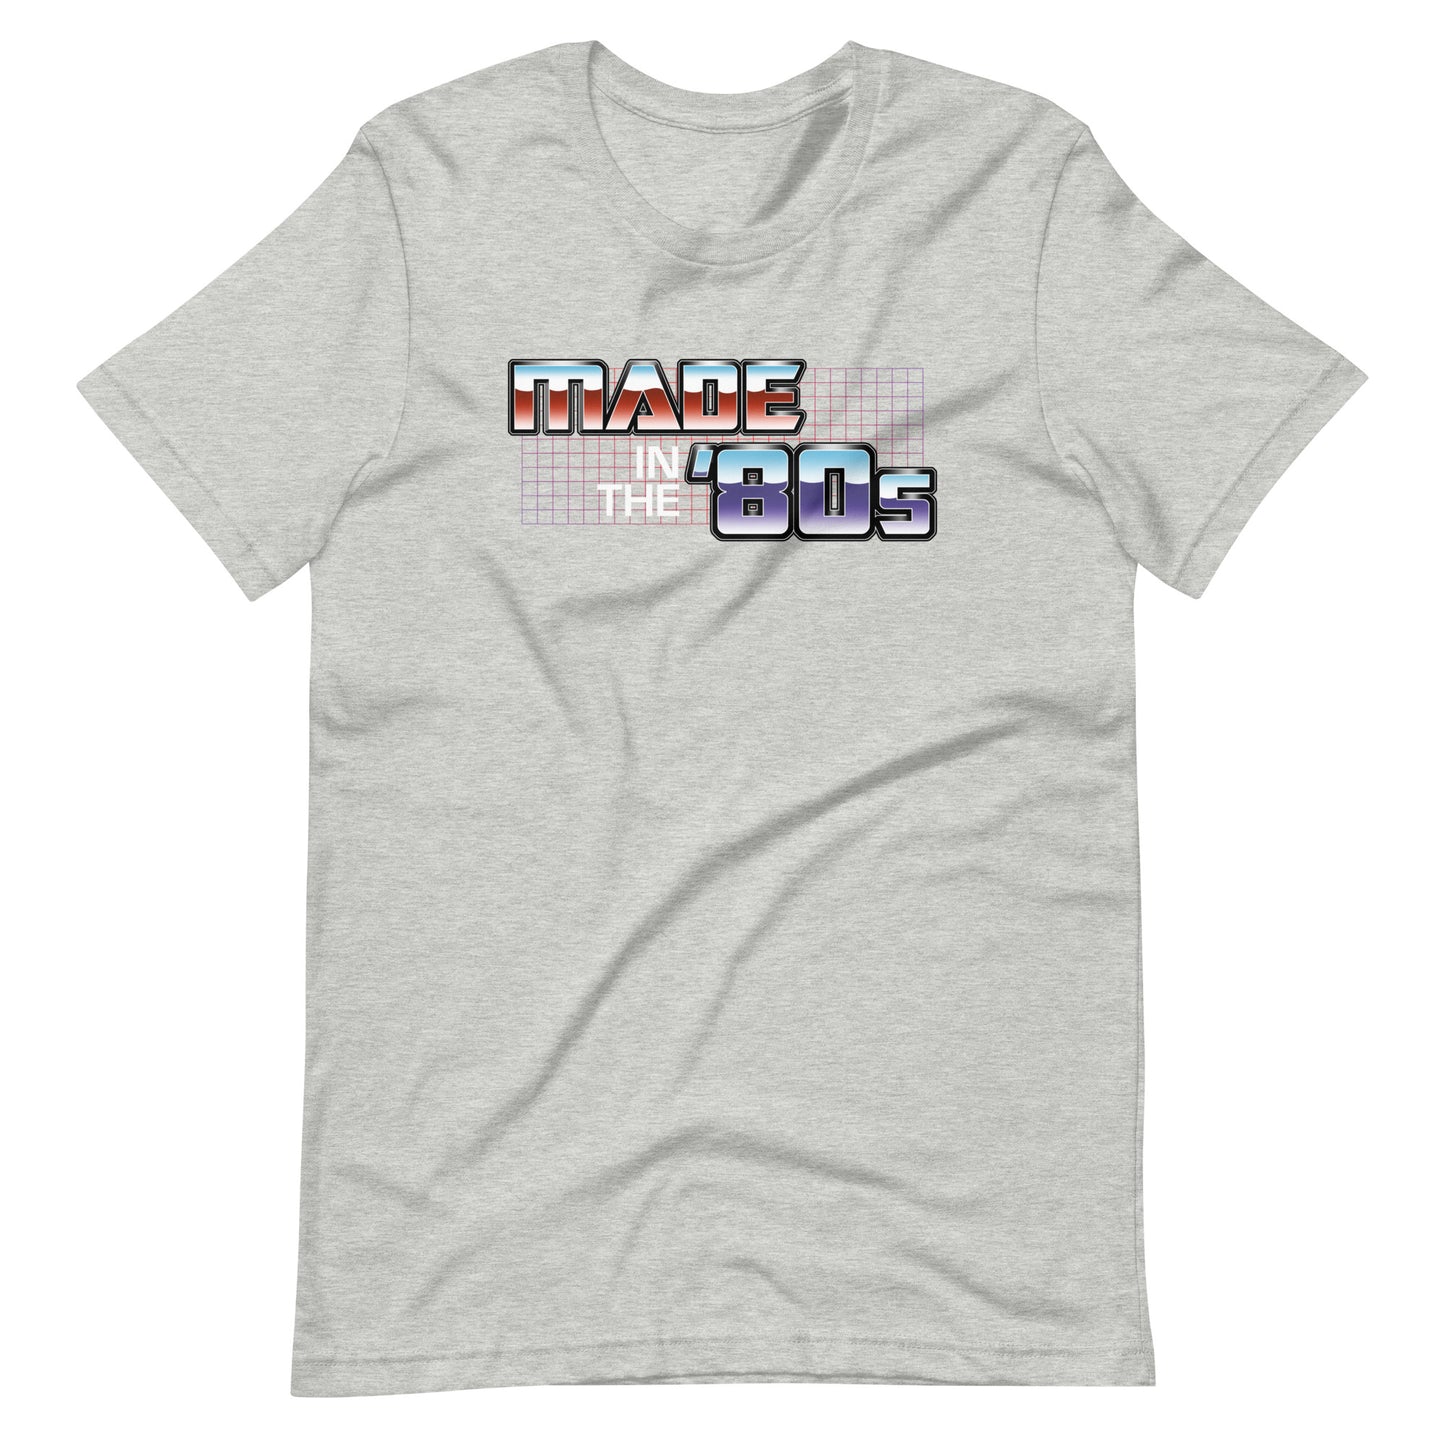 Made in the '80s TF t-shirt